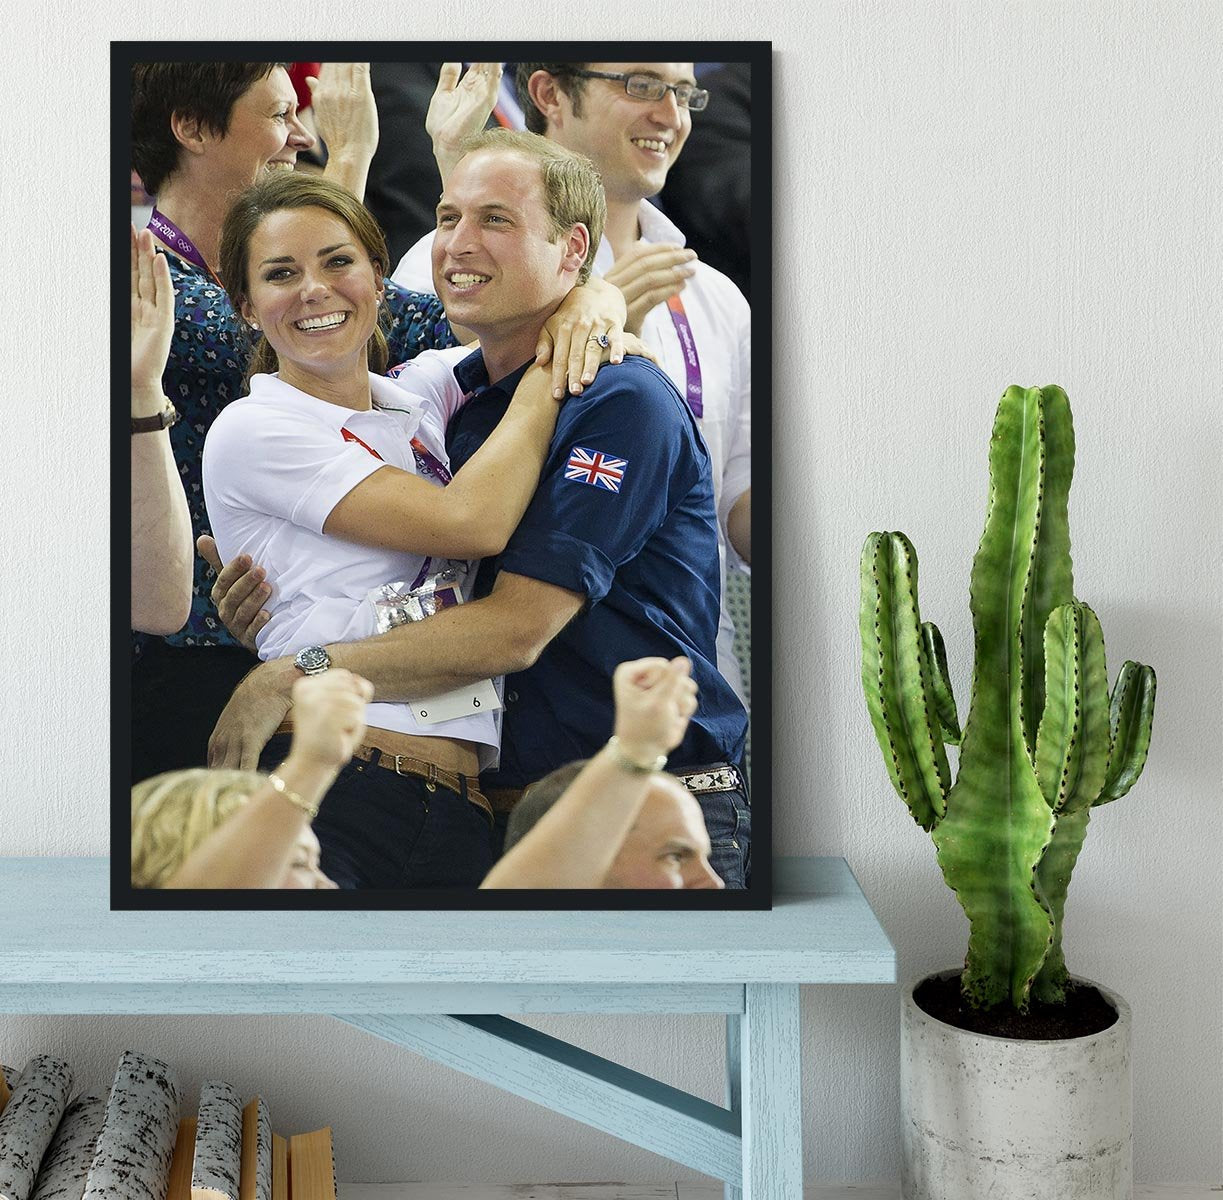 Prince William and Kate hugging at the 2012 Olympics Framed Print - Canvas Art Rocks - 2